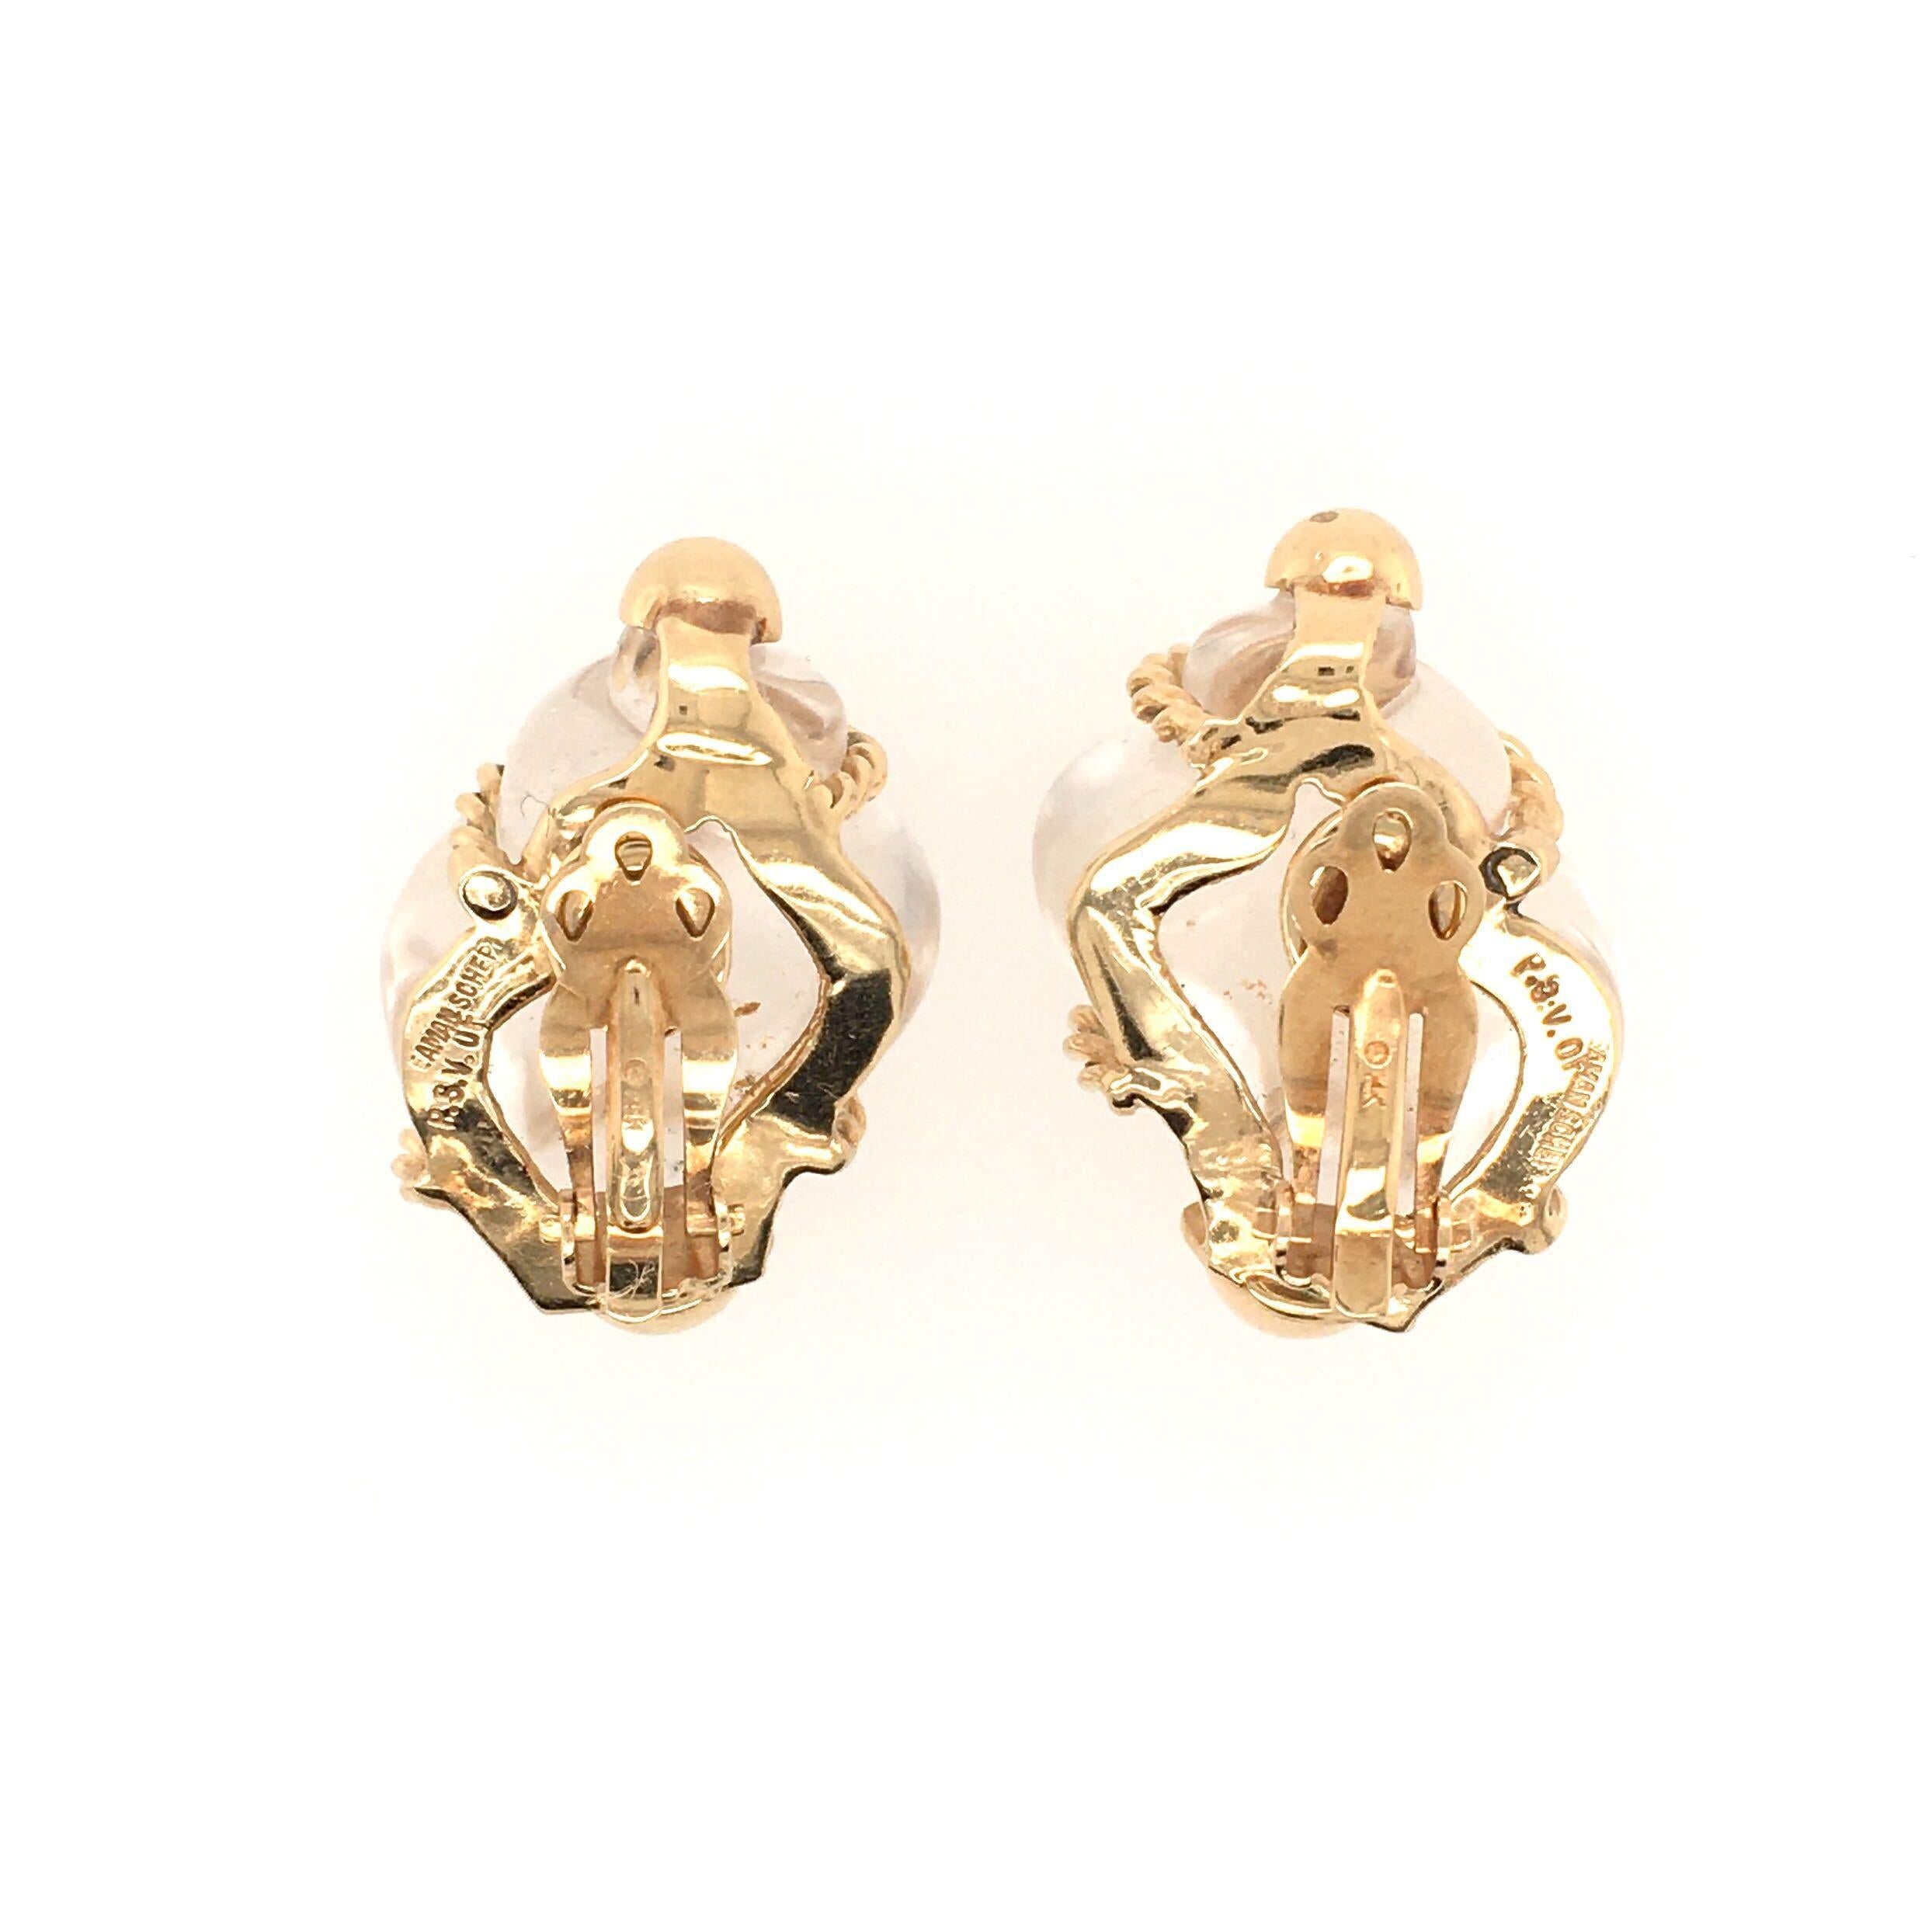 A pair 14 karat yellow gold and rock crystal earrings. Patricia Schepps Vaill for Seaman Schepps. Circa 1980. Each set with a carved rock crystal shell, wrapped in yellow gold rope work. Length is approximately 1 1/4 inches, gross weight is